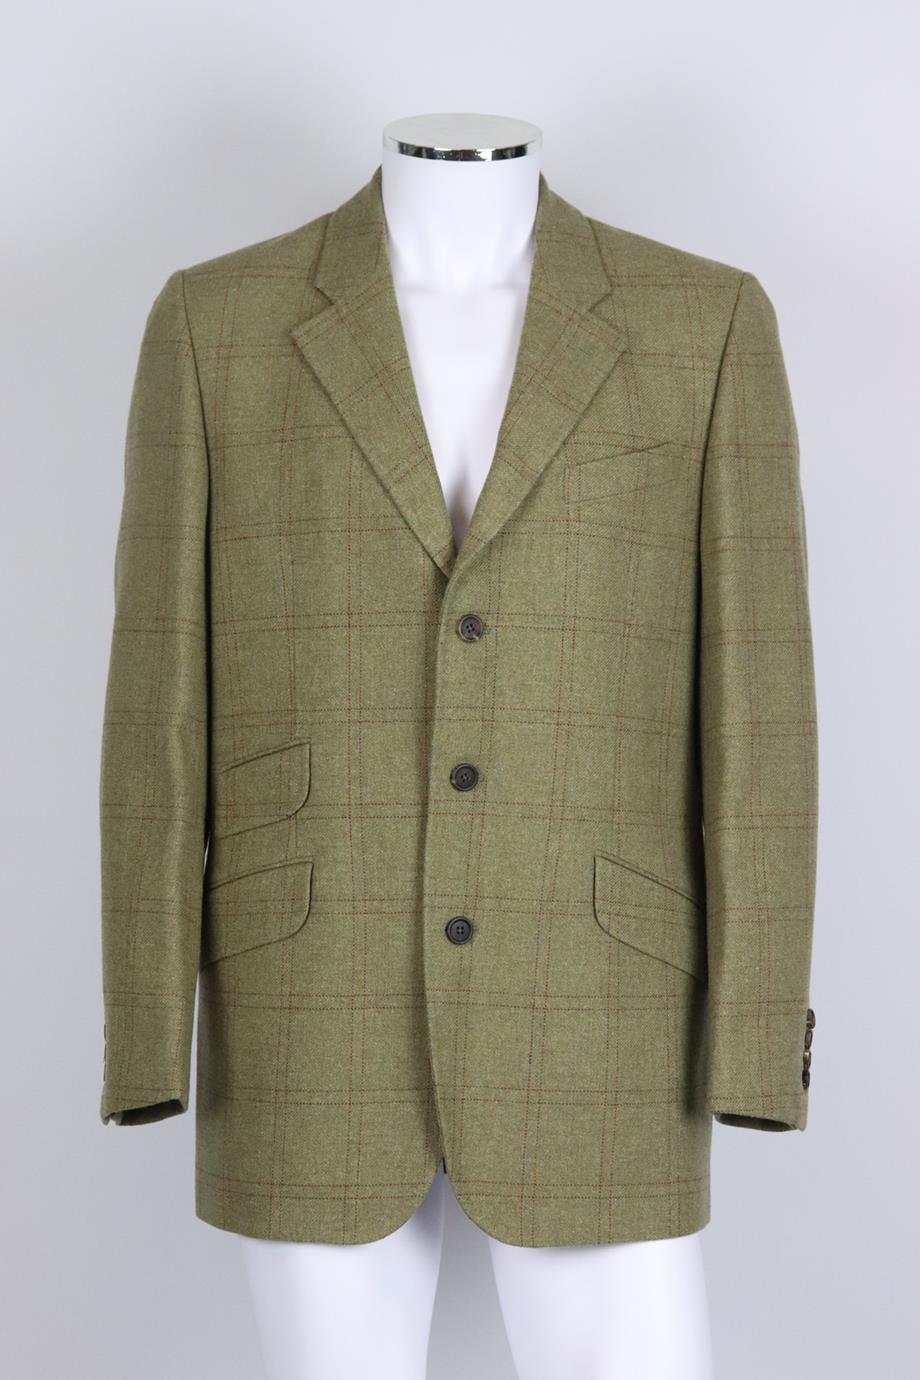 Purdey men's checked wool blend tweed blazer. Green and red. Long sleeve, v-neck. Button fastening at front. 100% Wool; lining: 100% viscose. Size: UK/US Chest 42 (Large, IT 52, EU 52). Shoulder to shoulder: 17.5 in. Chest: 44 in. Waist: 41 in.